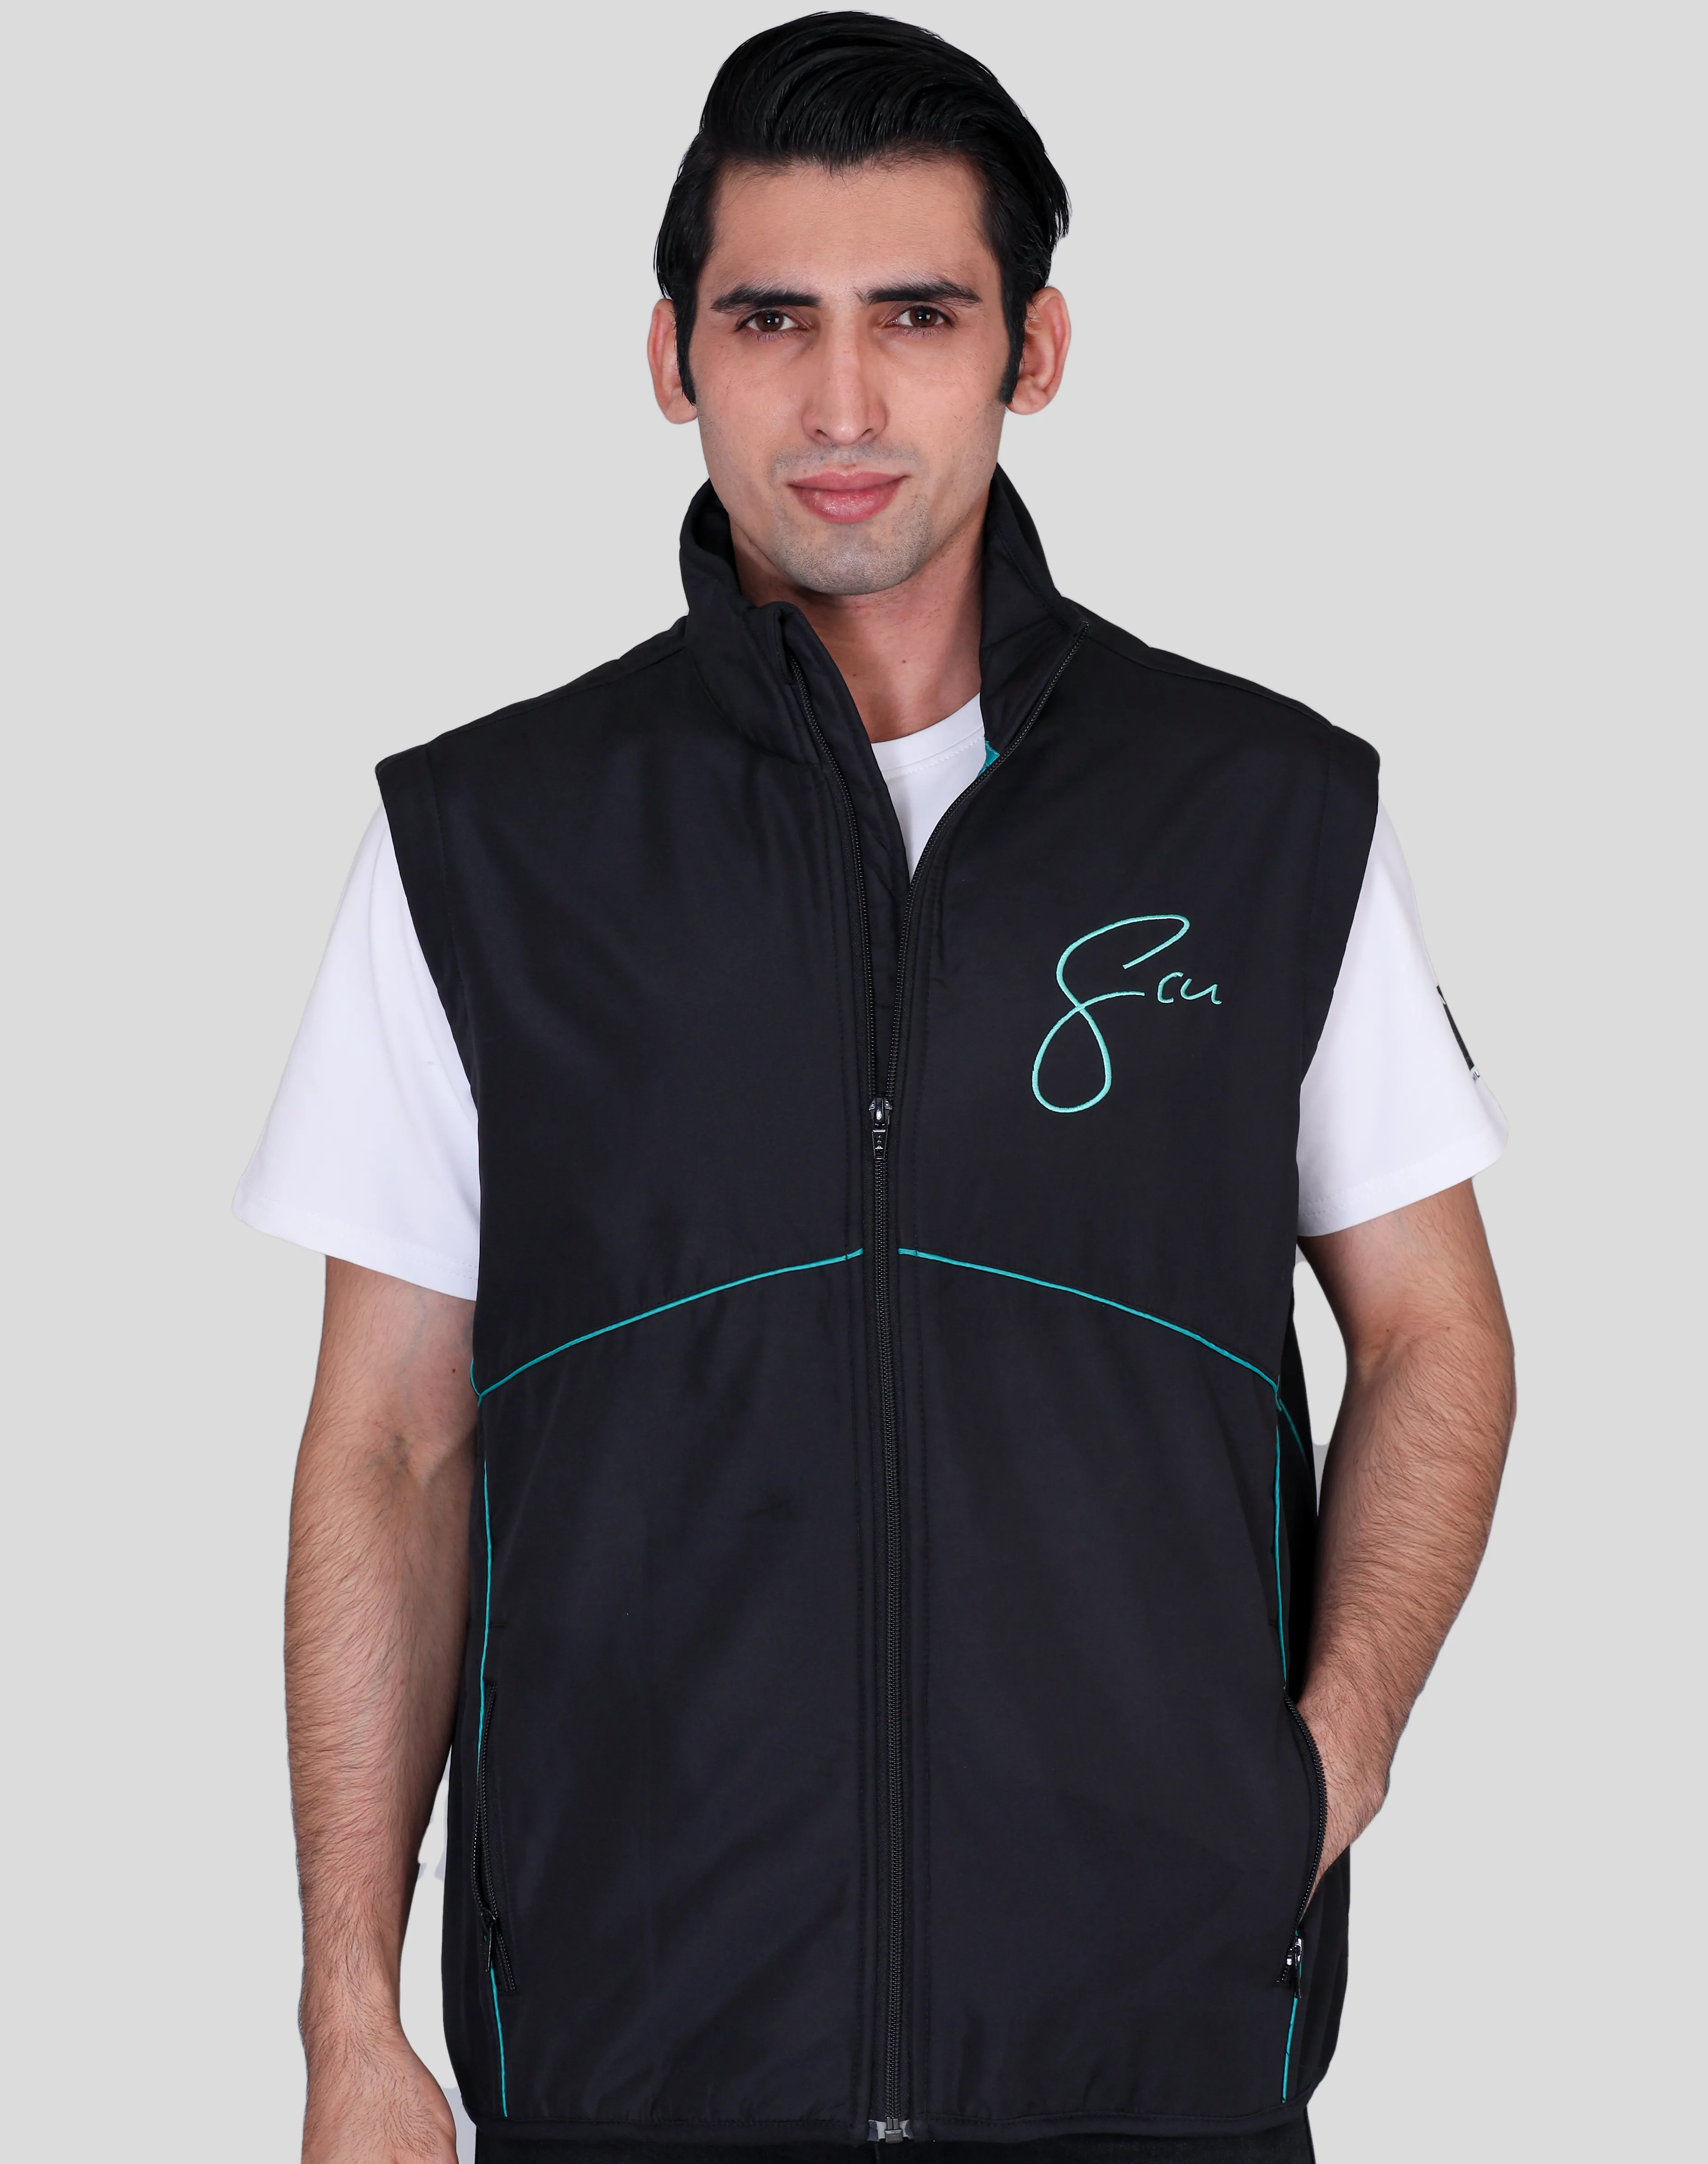 Corporate jackets manufacturer